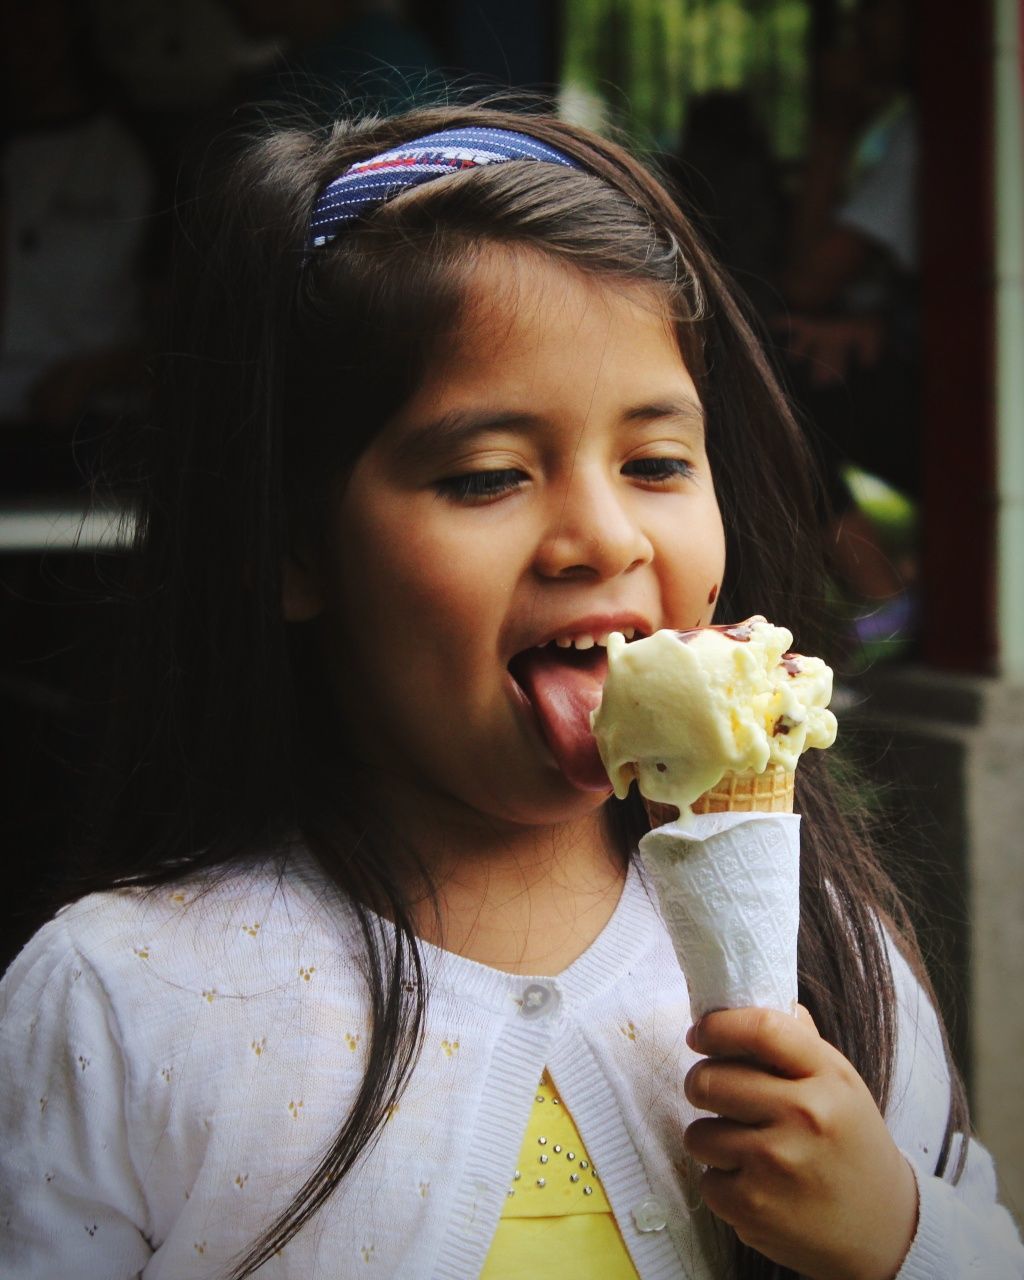 child, one person, childhood, food and drink, real people, holding, food, portrait, sweet food, headshot, lifestyles, girls, front view, eating, frozen food, ice cream, women, happiness, innocence, cute, temptation, hairstyle, mouth open